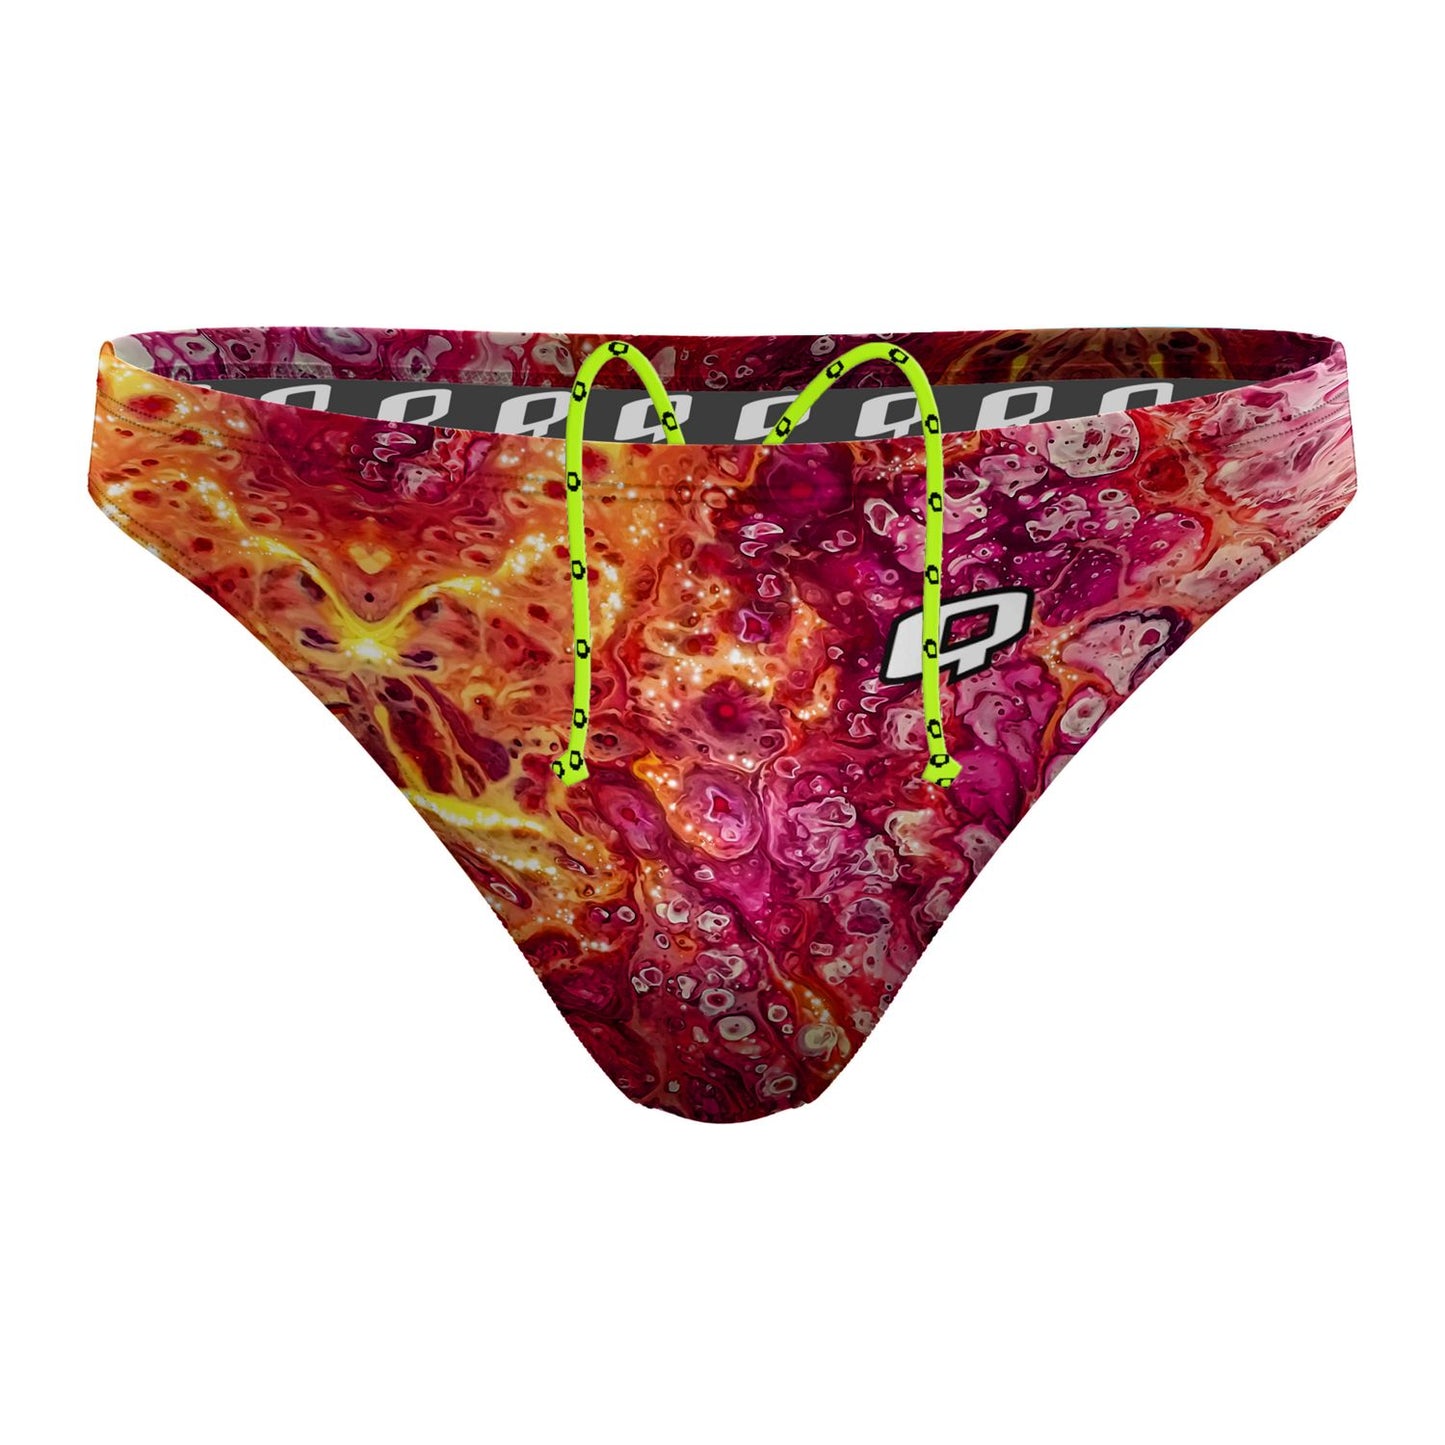 Catching Fire Waterpolo Brief